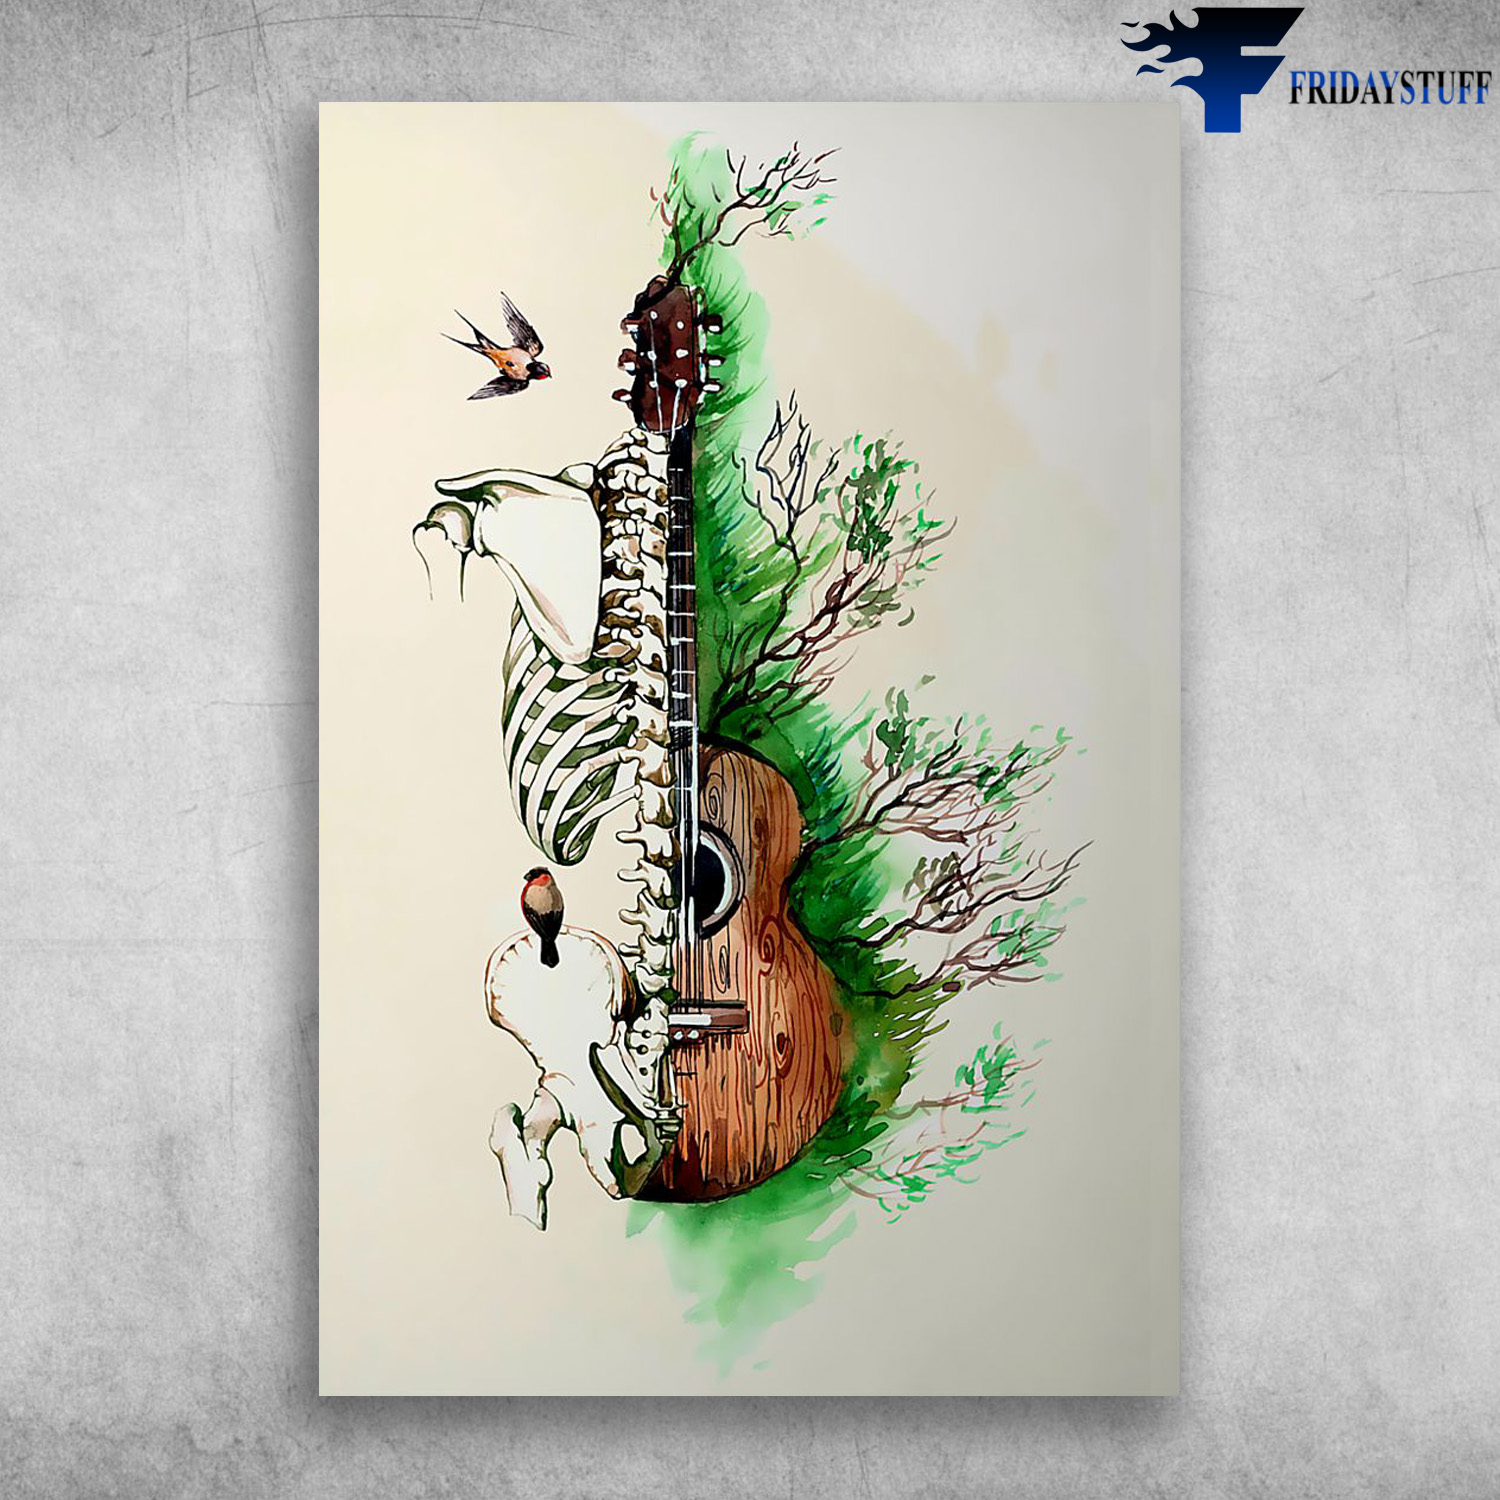 Art Guitar Instrument With Human Skeleton And Green Tree Guitarists United